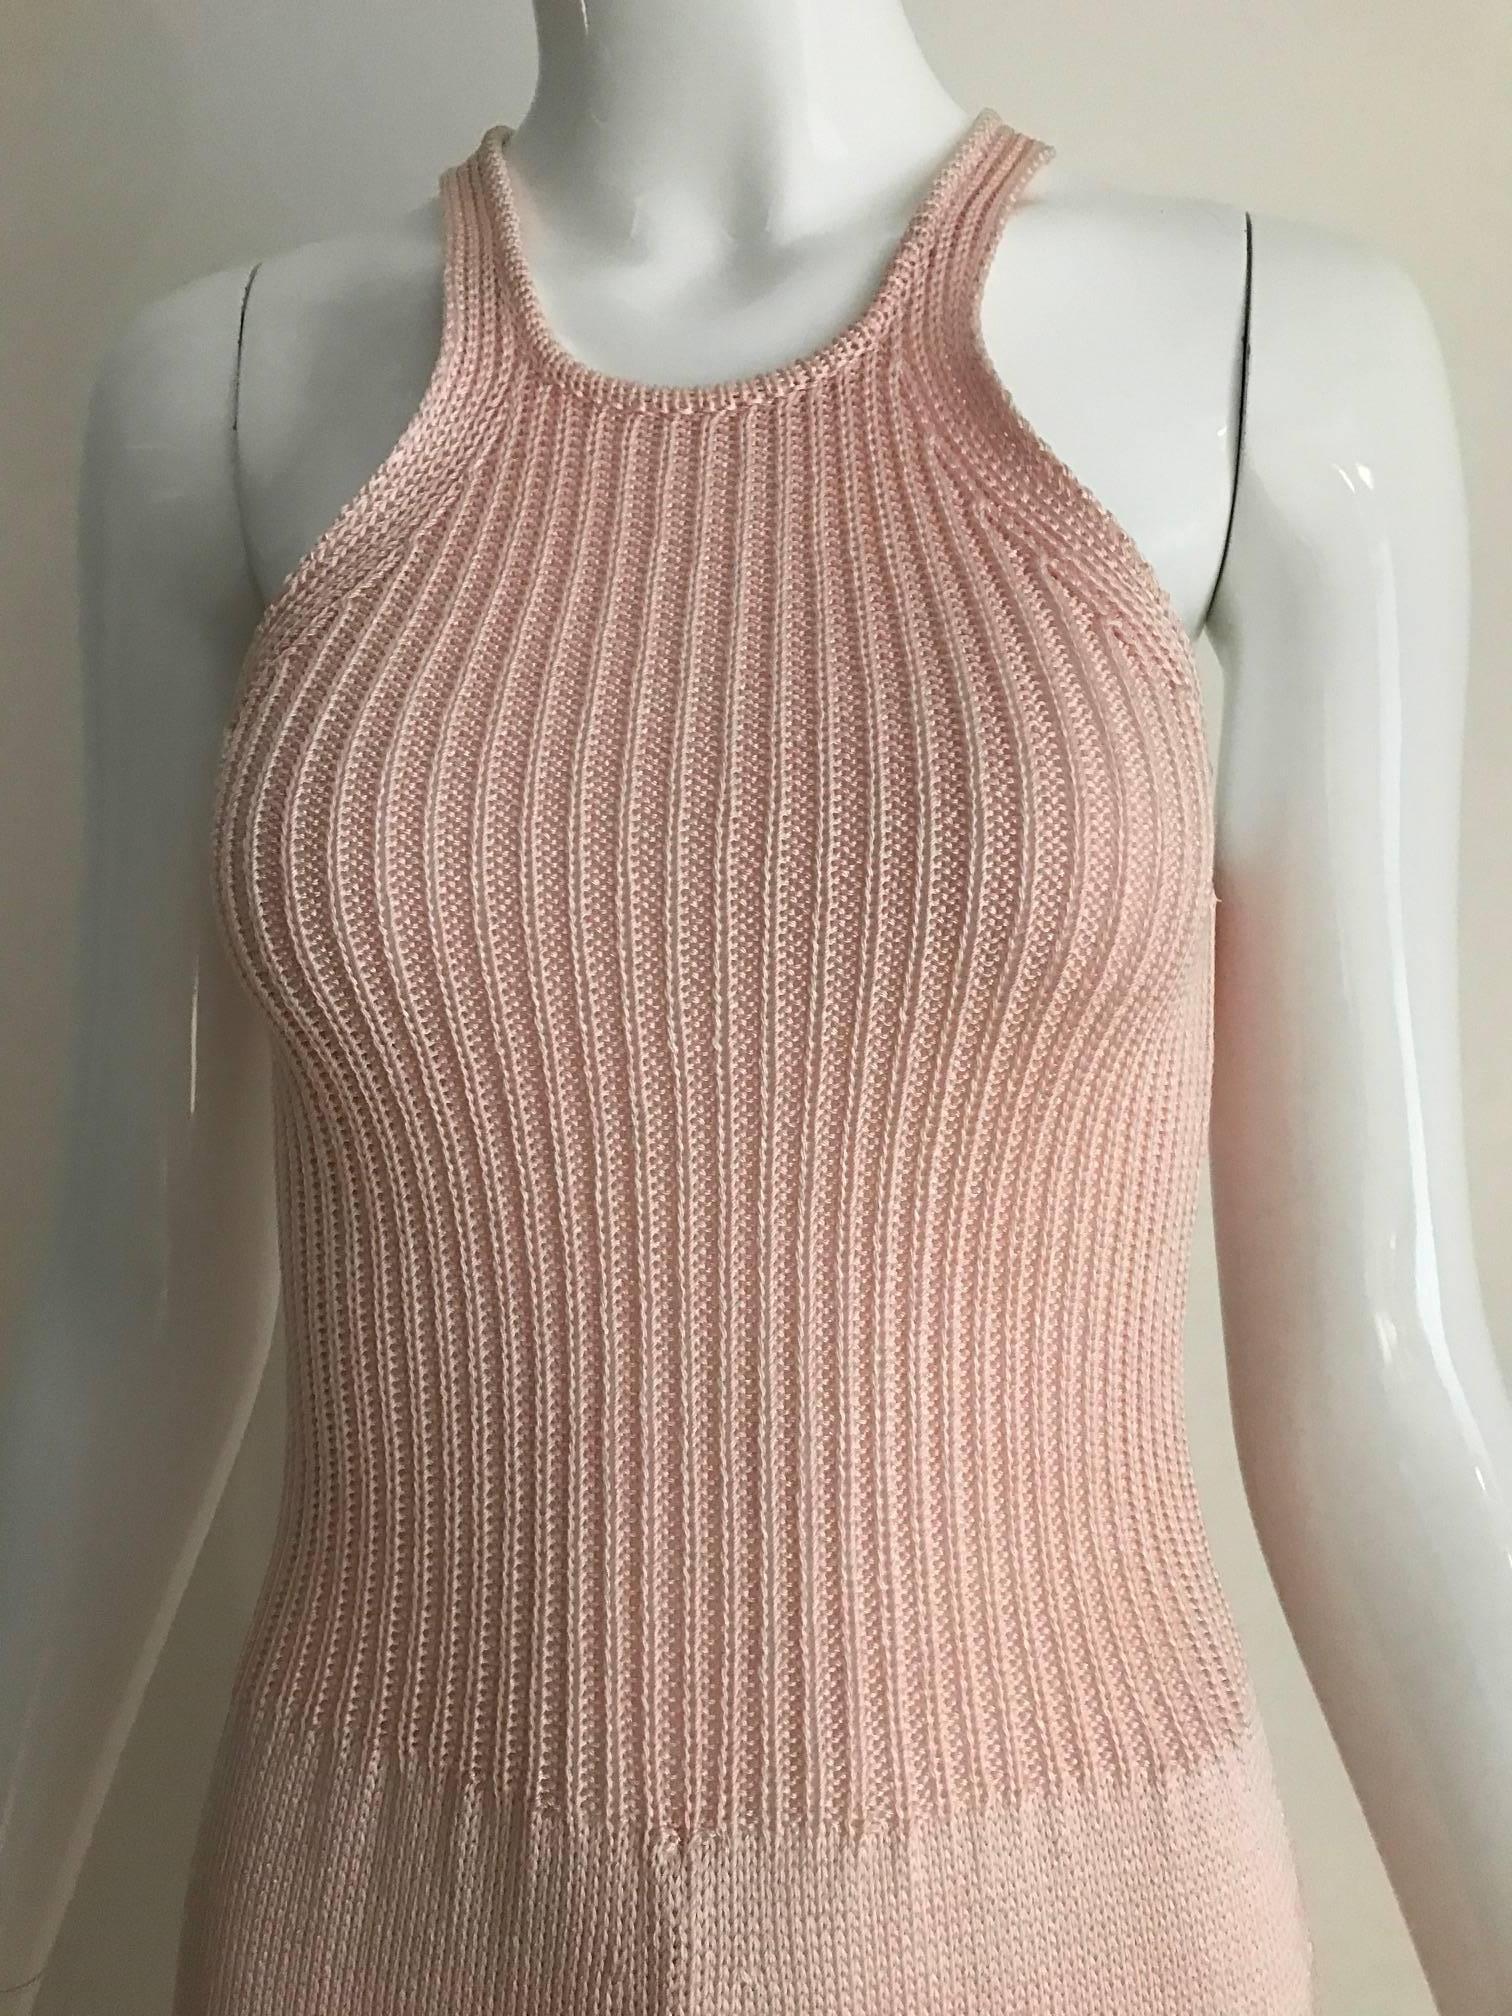 Vintage 1990s KRIZIA Light Pink racer back  Mini Sweater dress. 
Size: 2/4 XSMALL - SMALL
Measurement:
Bust: 30 inch - 32 inch ( stretch)
Waist: same as bust
Hip: 32 inch - 34 inch / Dress length: 34 inch
**** This Garment has been professionally